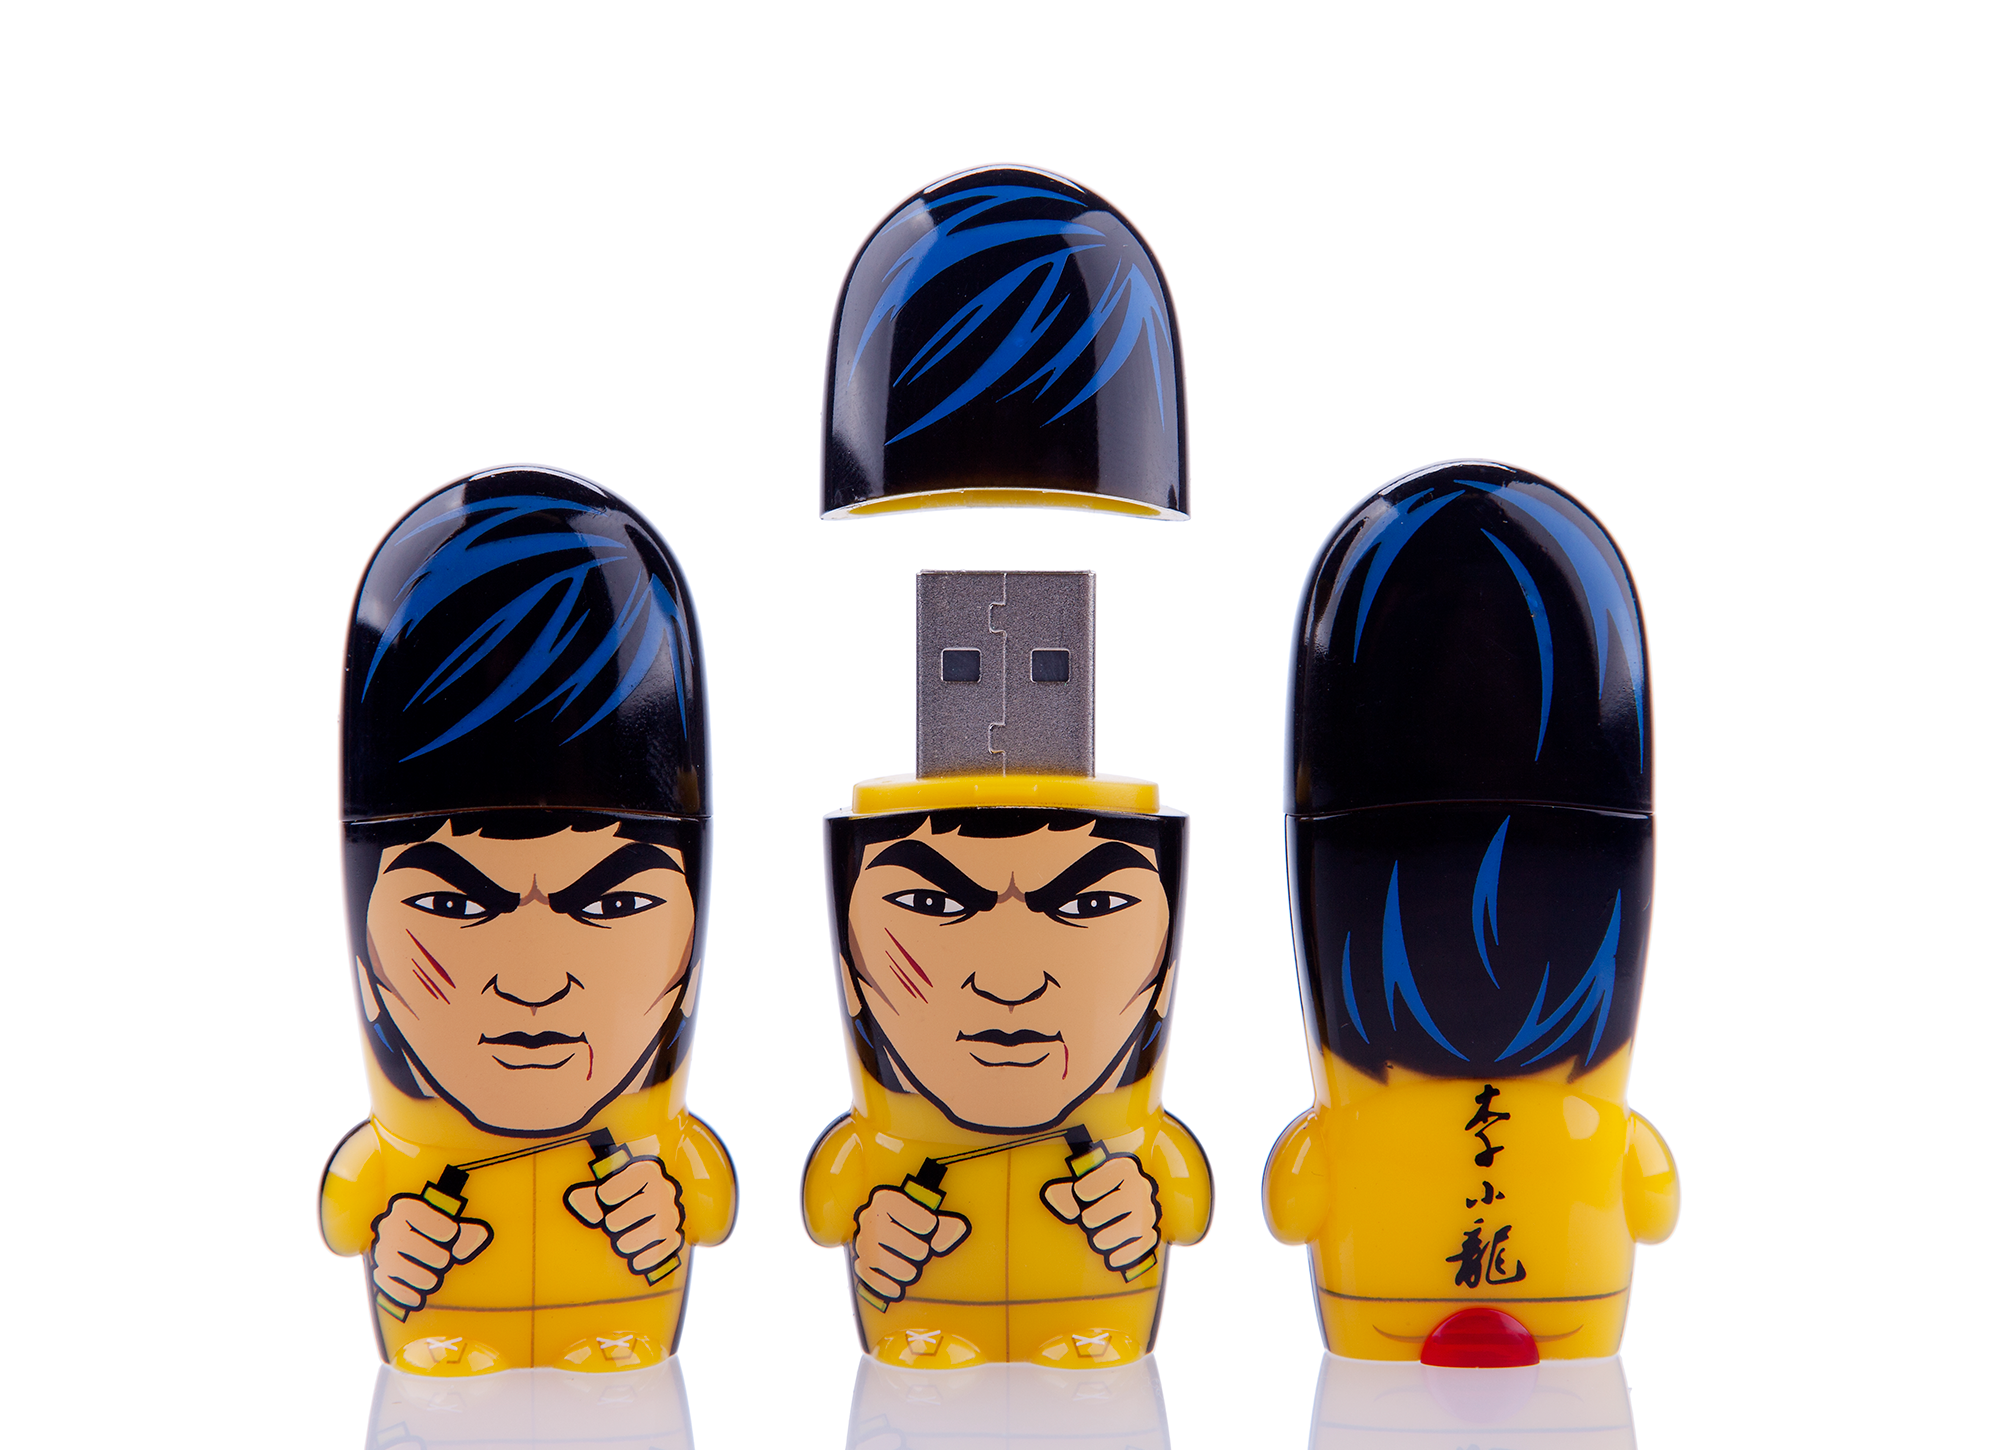 Bruce Lee MIMOBOT USB flash drive for Mimoco | LILLIAN LEE Art & Design